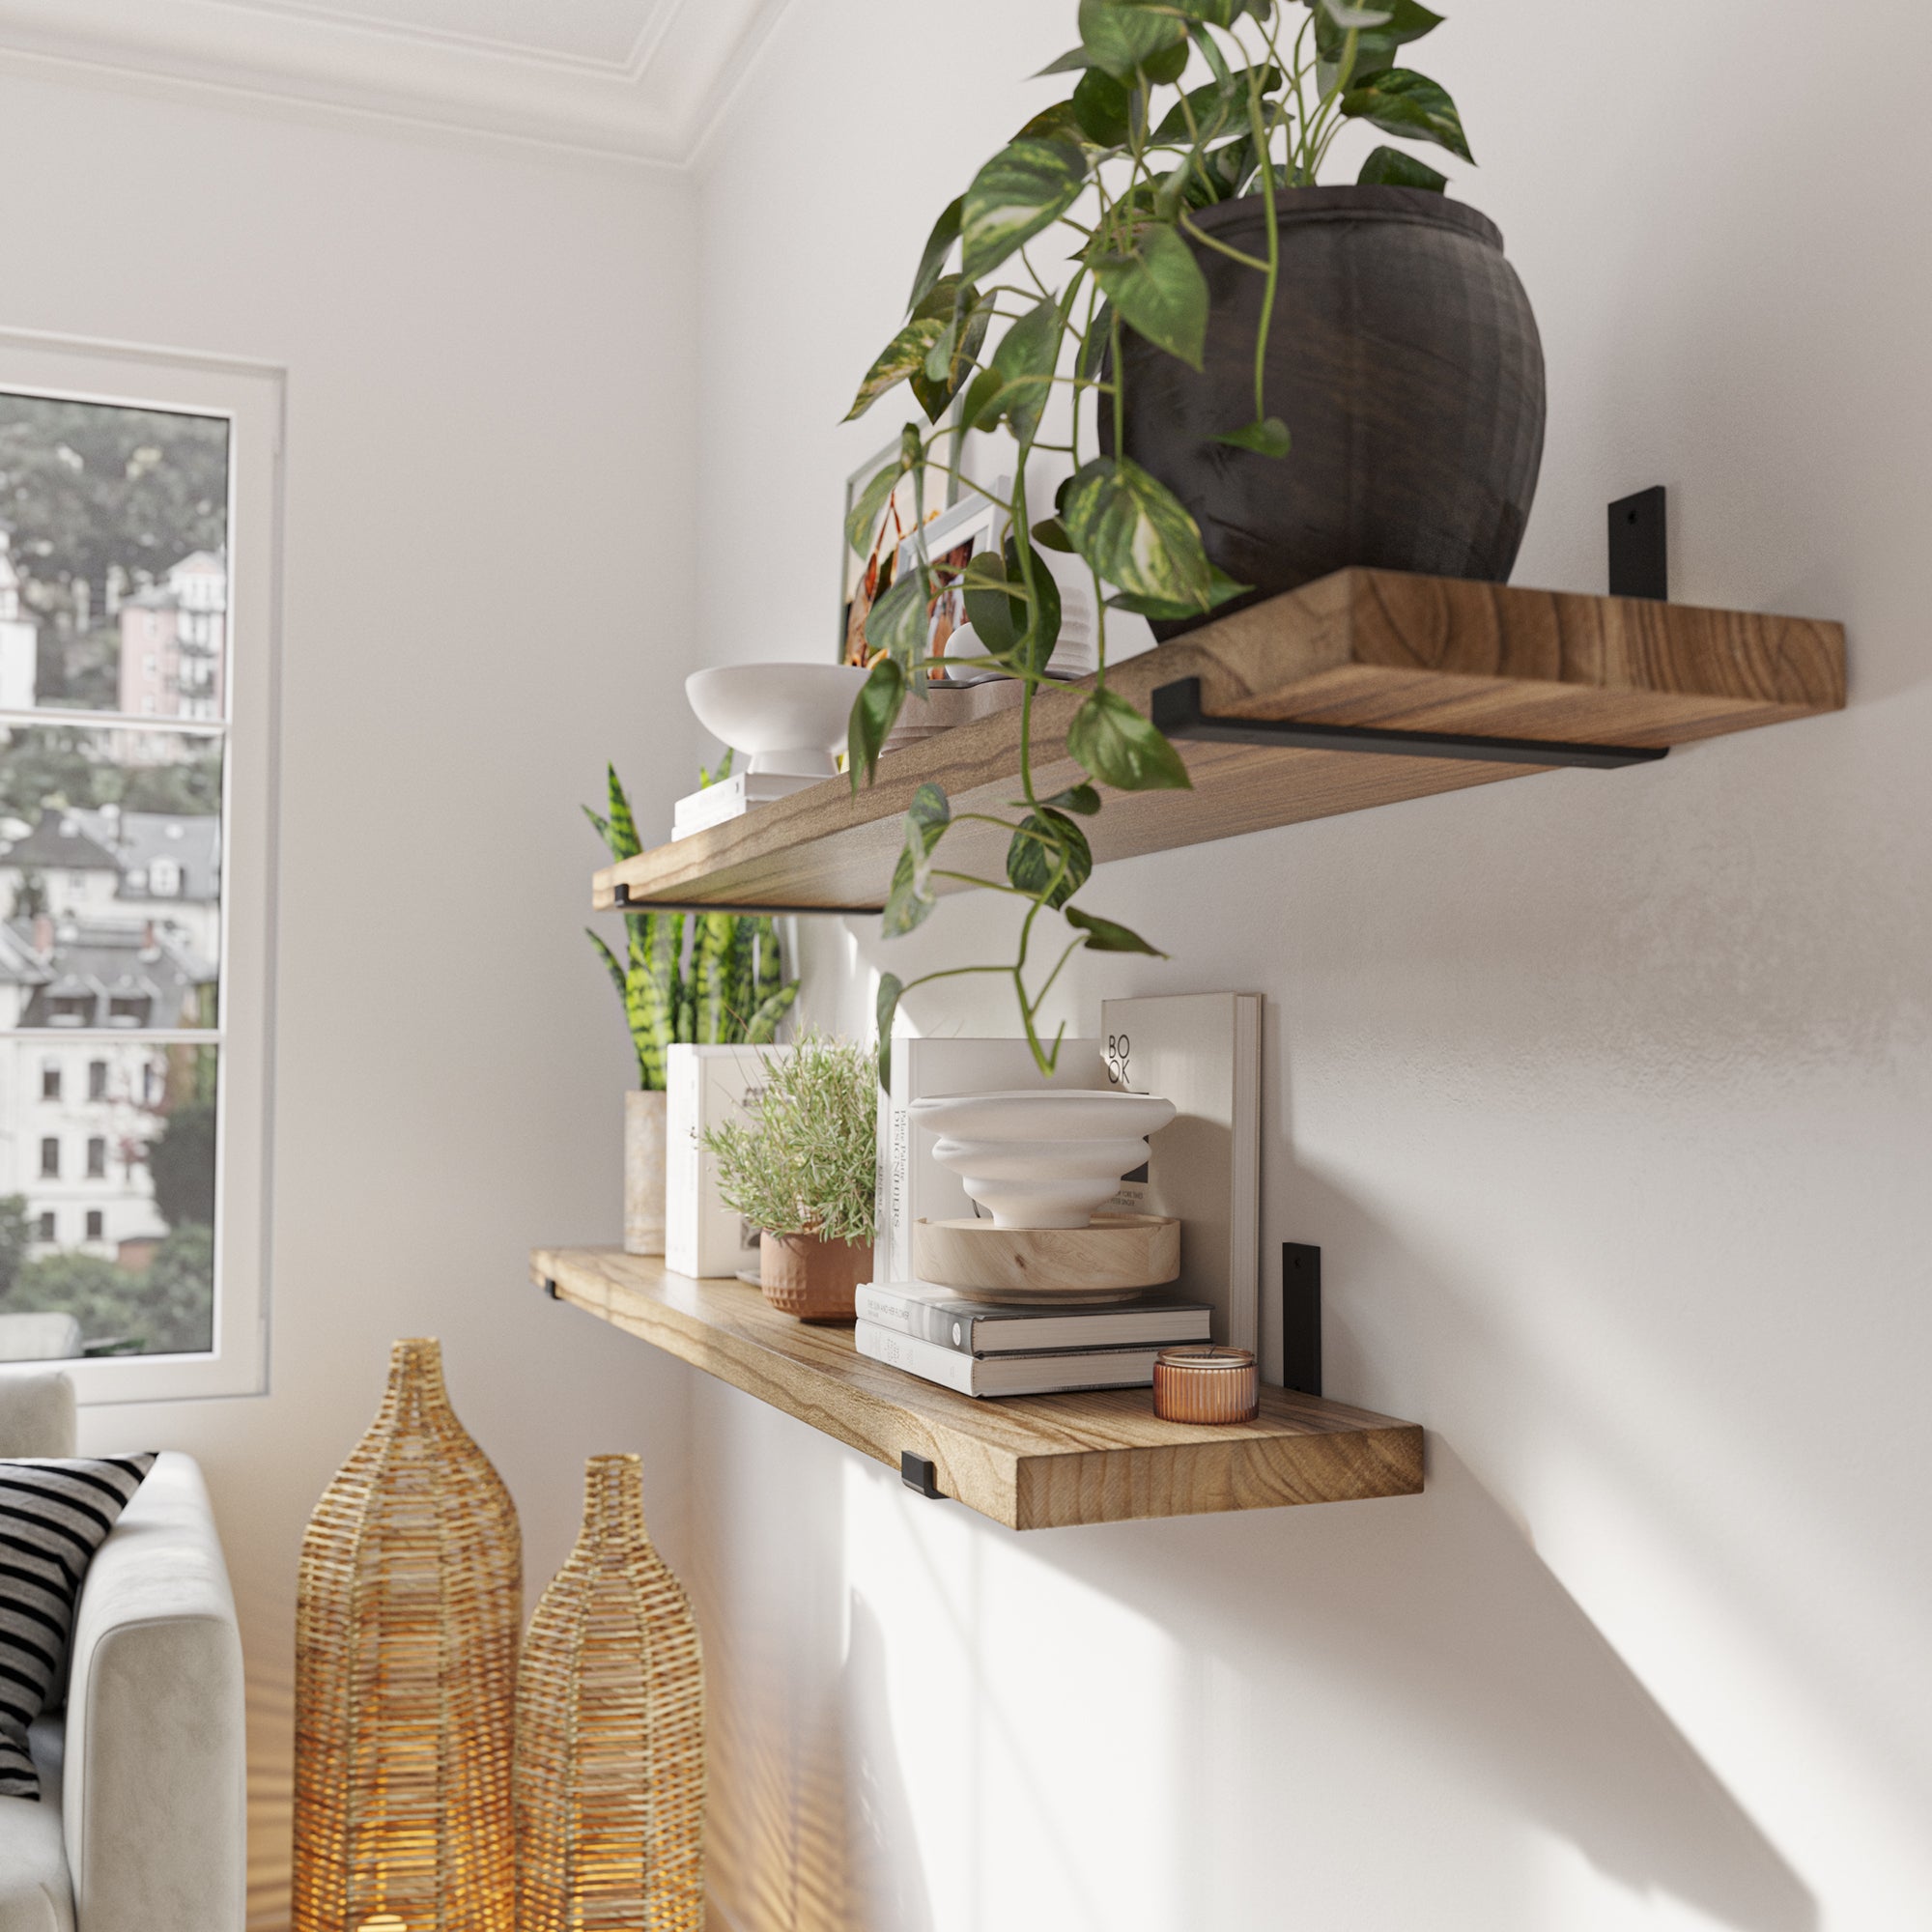 Wooden shelves with plants and décor in a bright room.